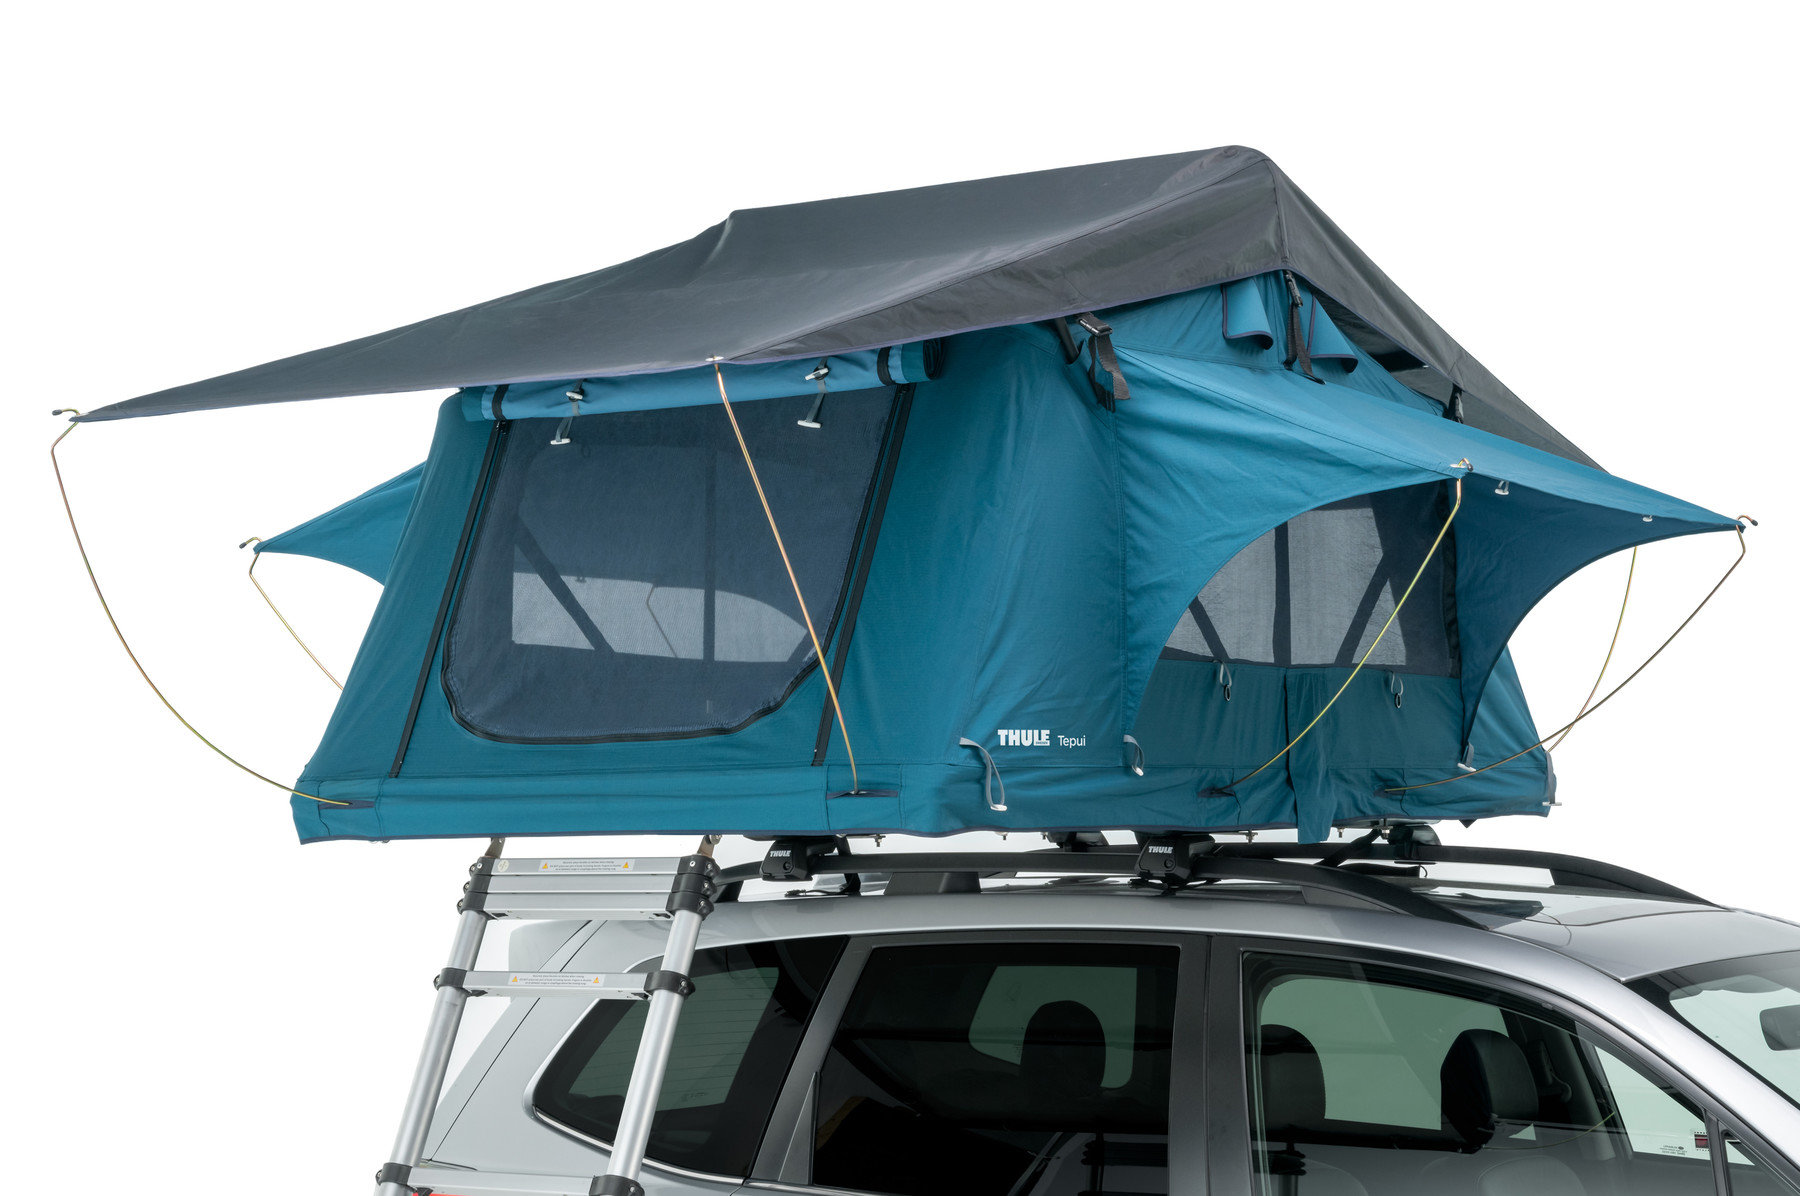 https://www.quadratec.com/sites/default/files/styles/product_zoomed/public/product_images/thule-901201-tepui-explorer-ayer-2-rofftop-tent-blue-main_0.jpg